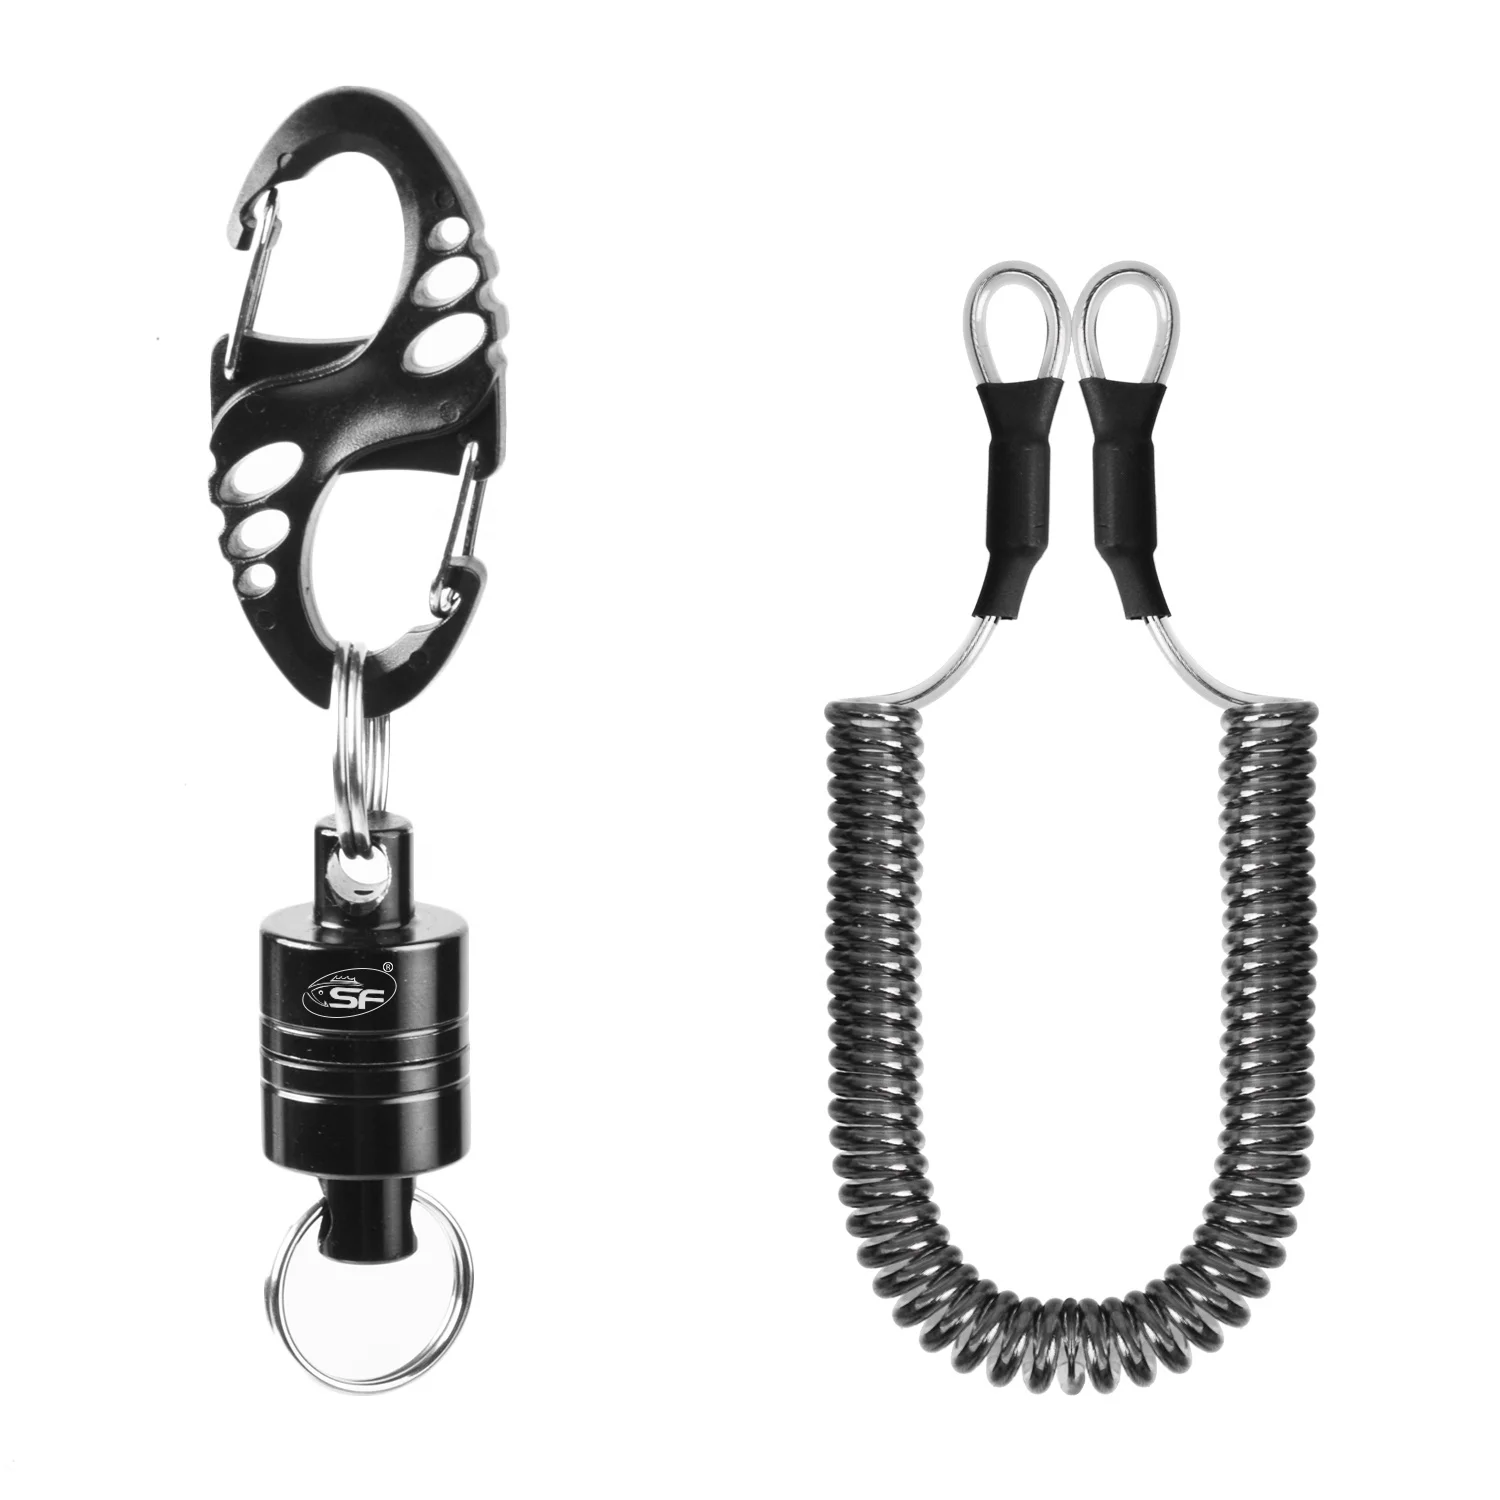 SF Strongest Magnetic Net Release Magnet Clip Holder Retractor with Coiled La... 